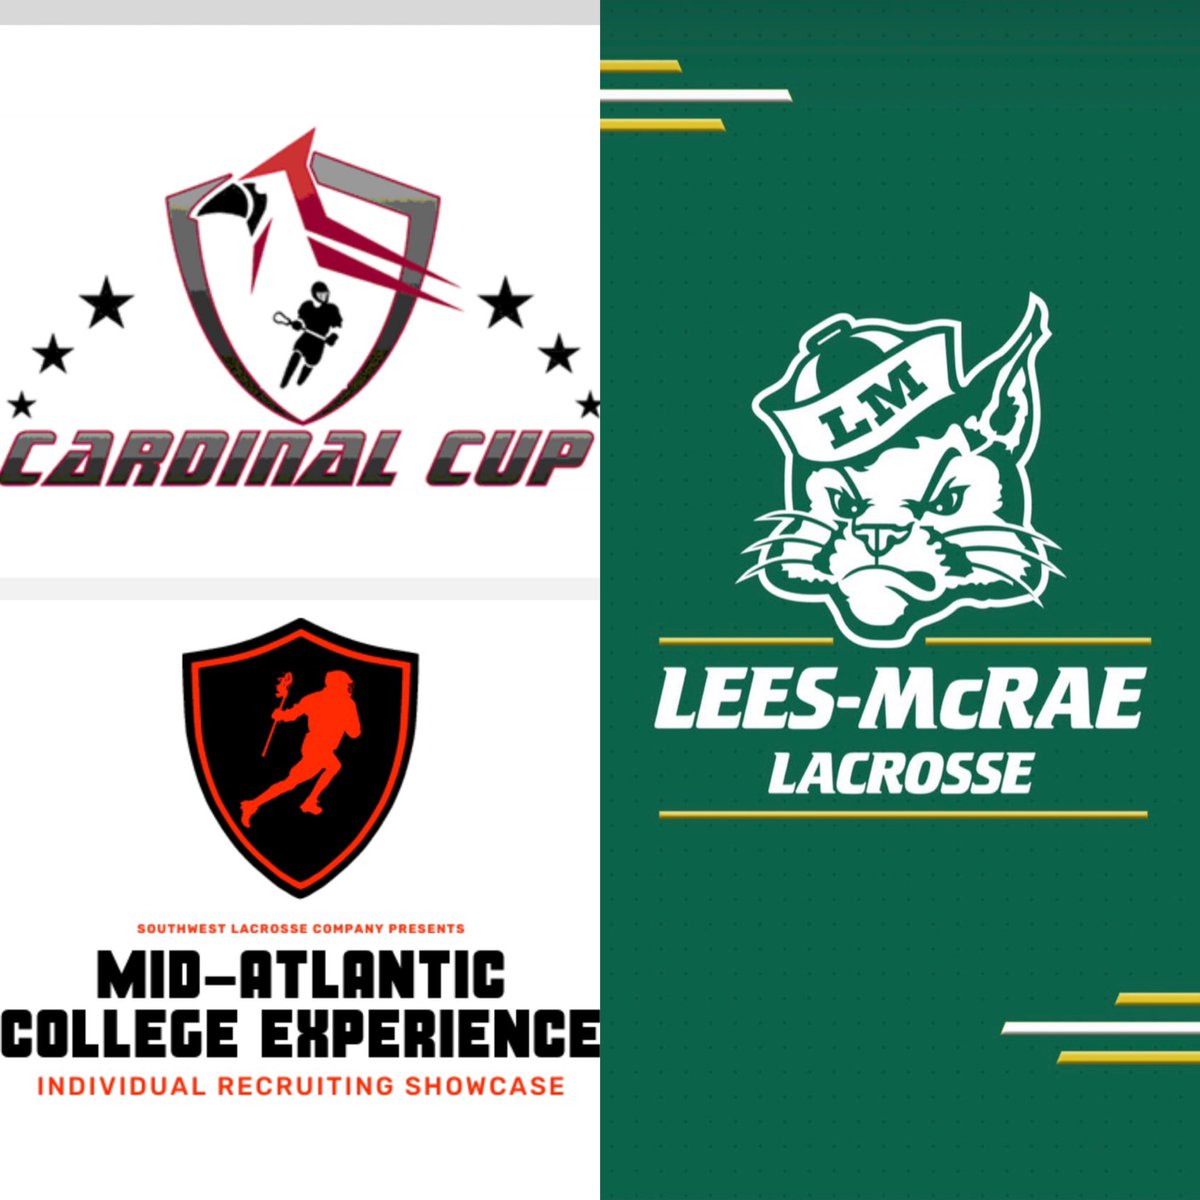 #CATlax coaches are on the road searching for those next great #FutureCats. Let us know if you will be at the Mid-Atlantic College Experience or Cardinal Cup tomorrow!